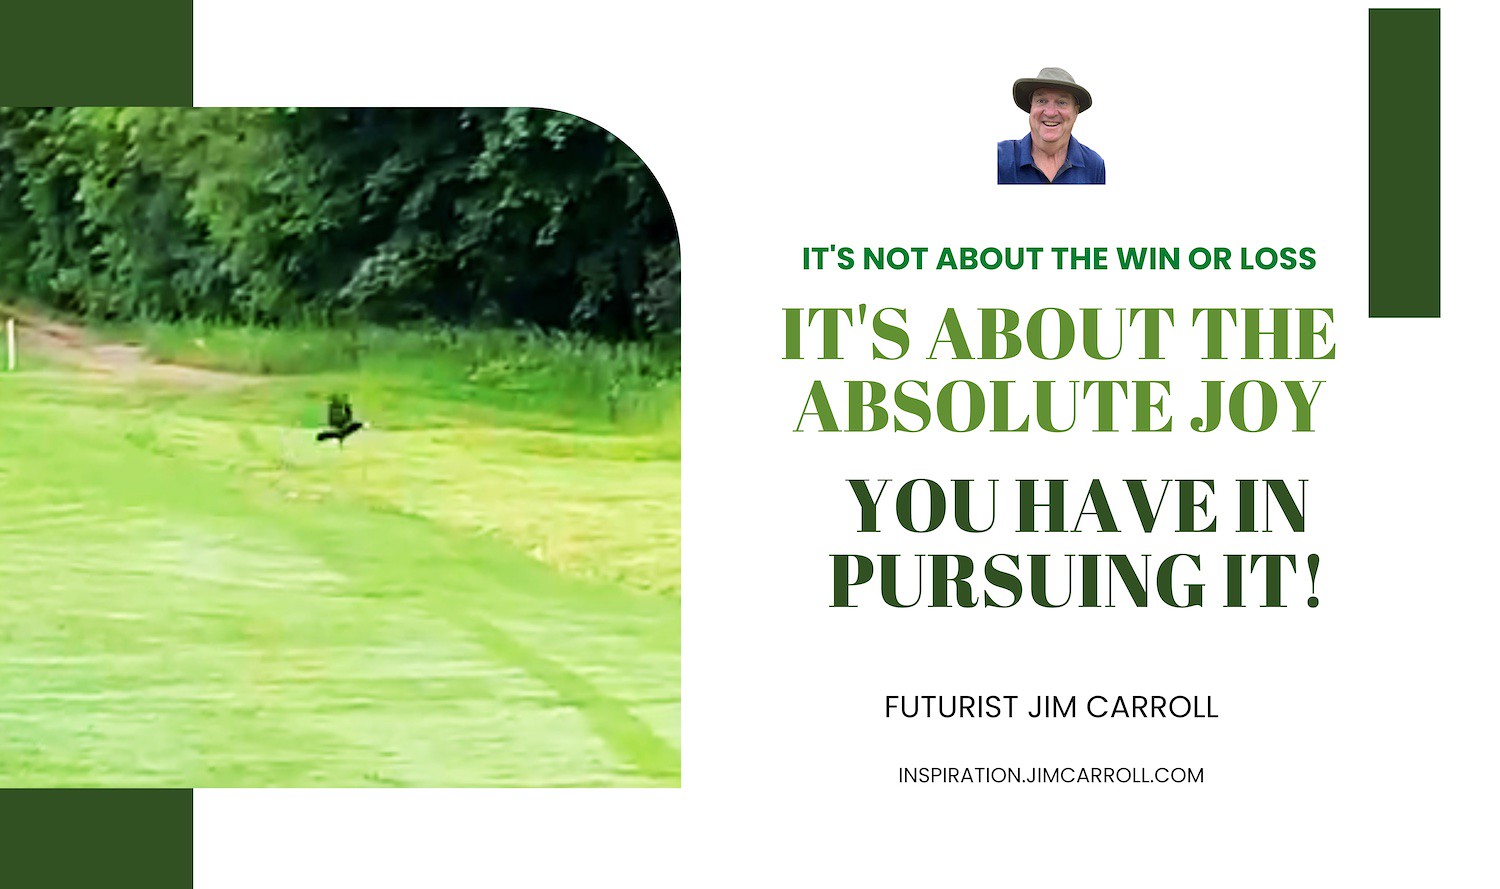 "It's not about the win or loss. It's about the absolute joy you have in pursuing it!" - Futurist Jim Carroll